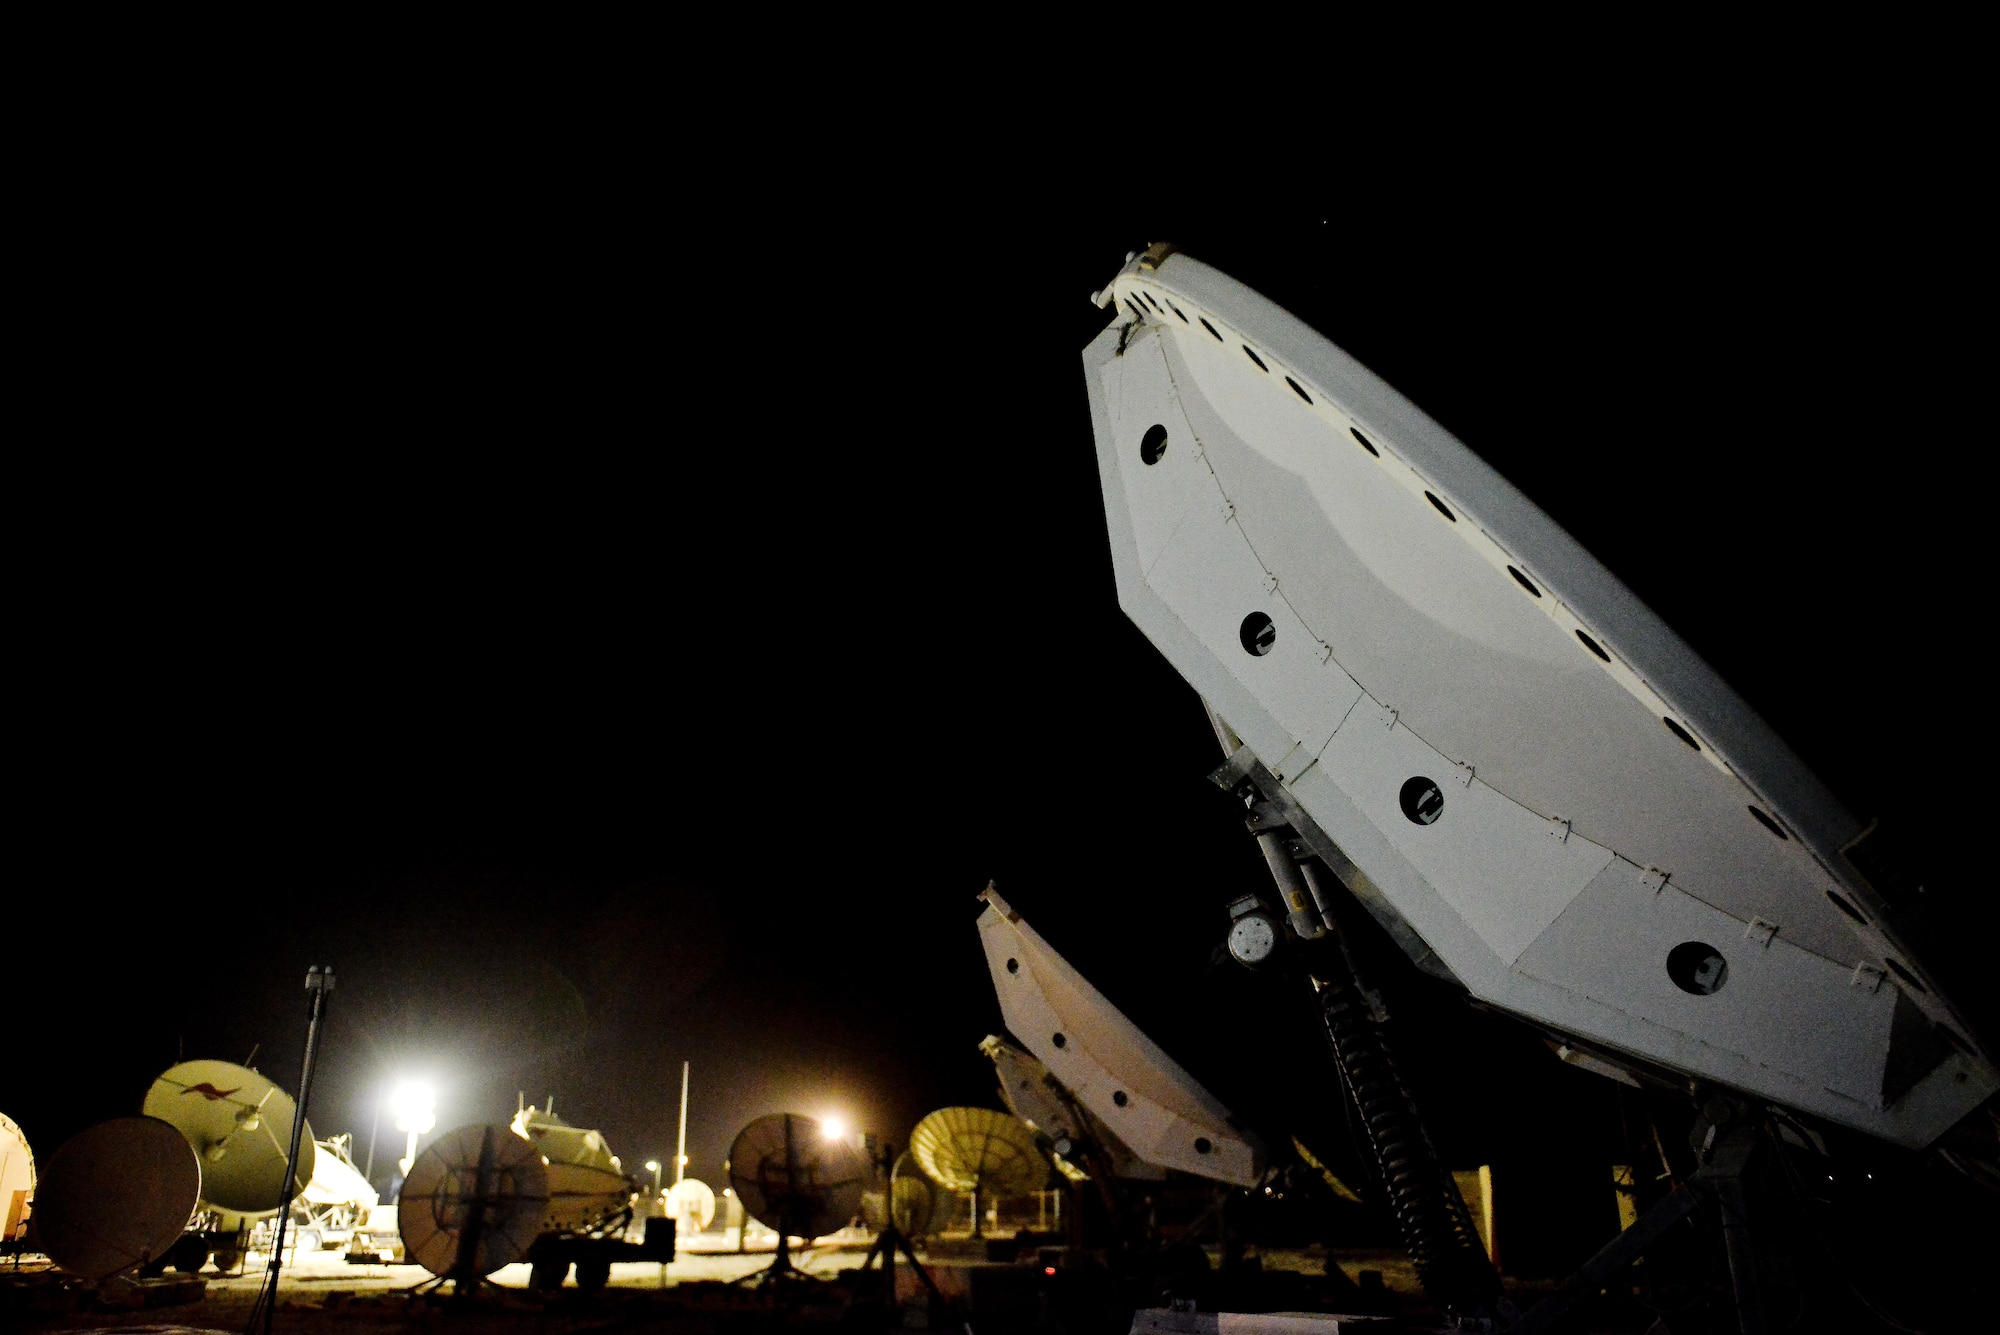 The 379th Expeditionary Operations Support Squadron Silent Sentry operates through an antenna ‘farm’ of two weapons systems named Rapid Attack Identification Detection Reporting System Deployable Ground Segment 0 and Bounty Hunter, which provide the only Defense Space Control mission throughout the entire AOR. (U.S. Air Force photo/Staff Sgt. Alexandre Montes)